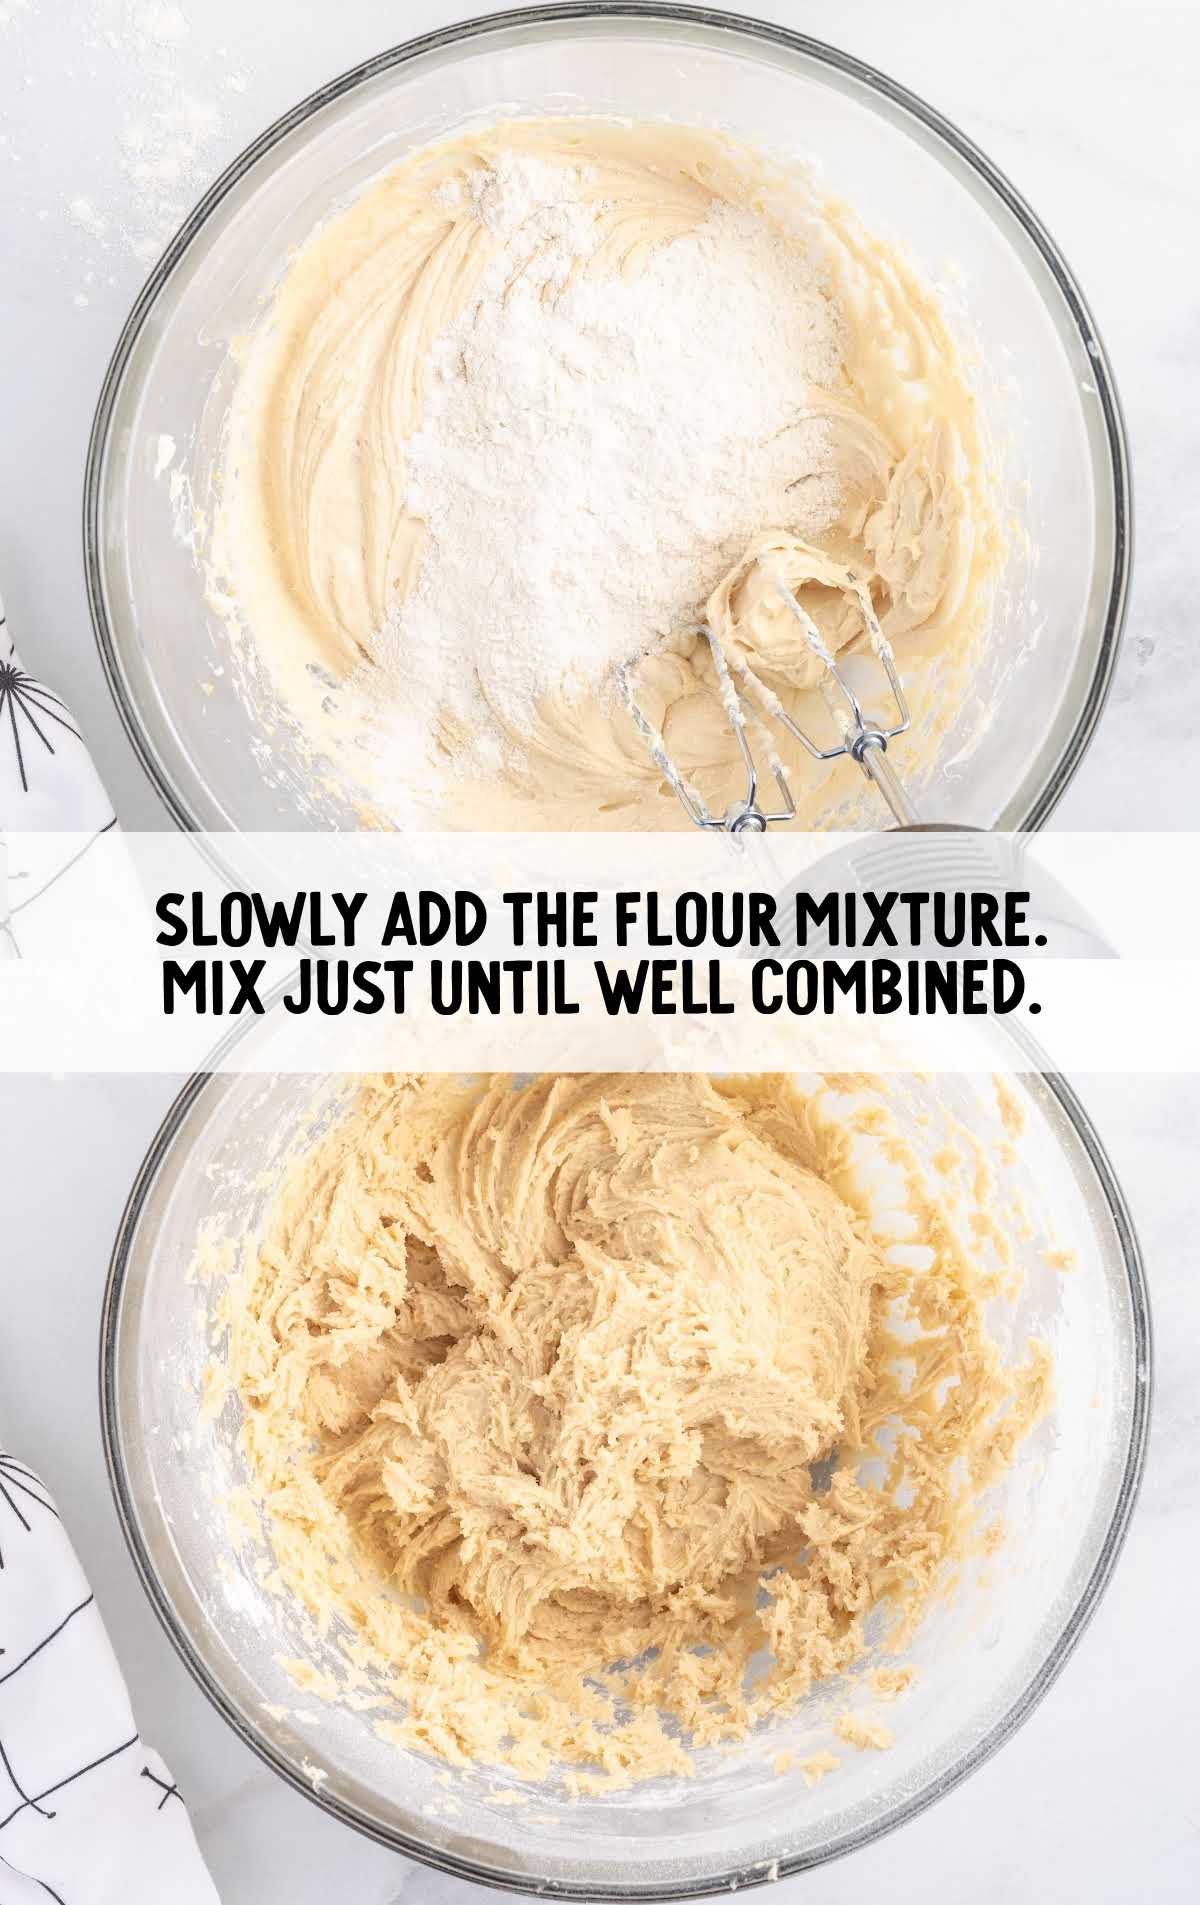 flour mixture added to the cookie dough batter in a bowl